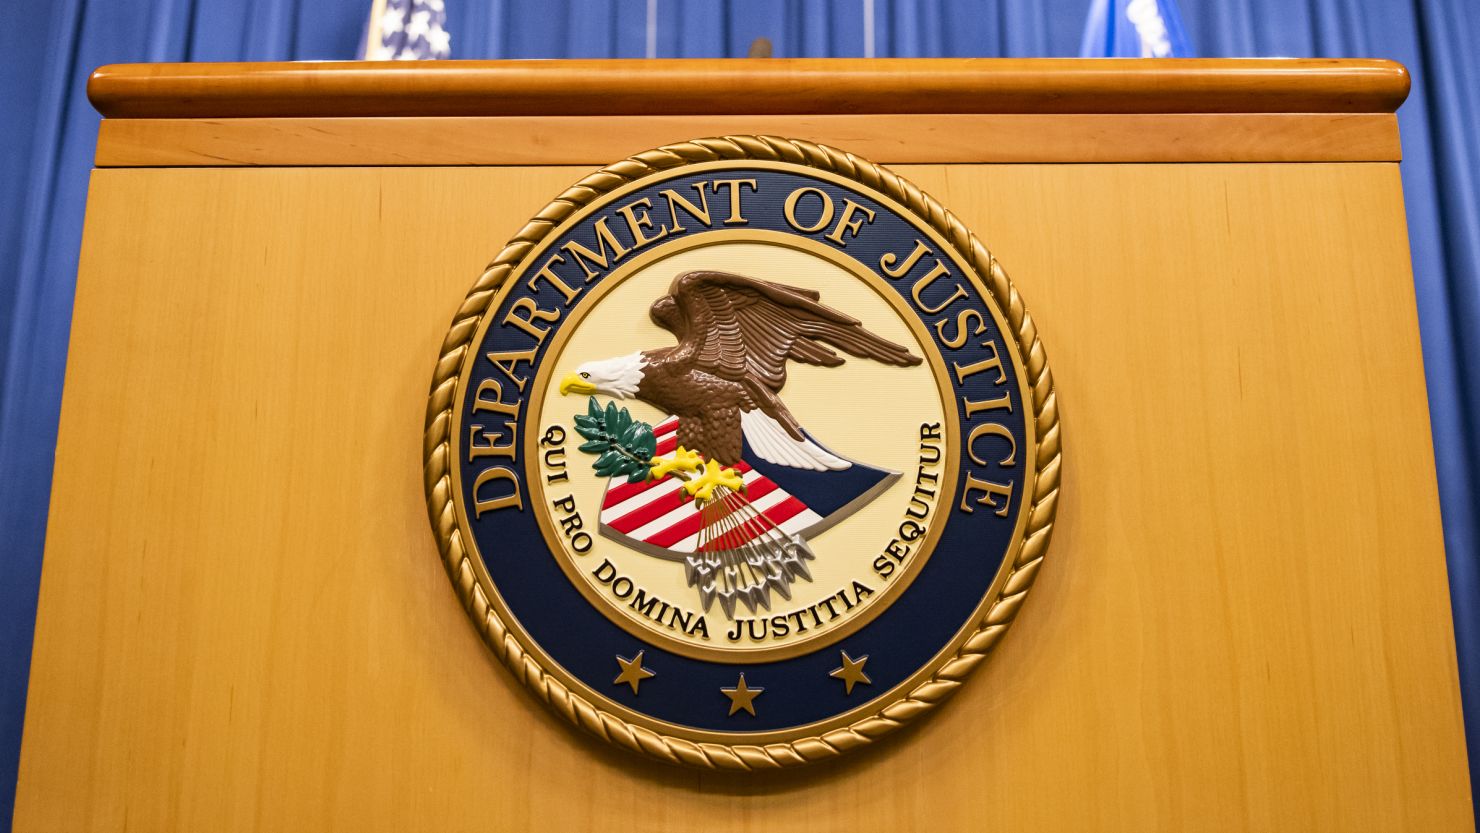 The Department of Justice seal on a podium in Washington, DC, on Thursday, August 5, 2021.